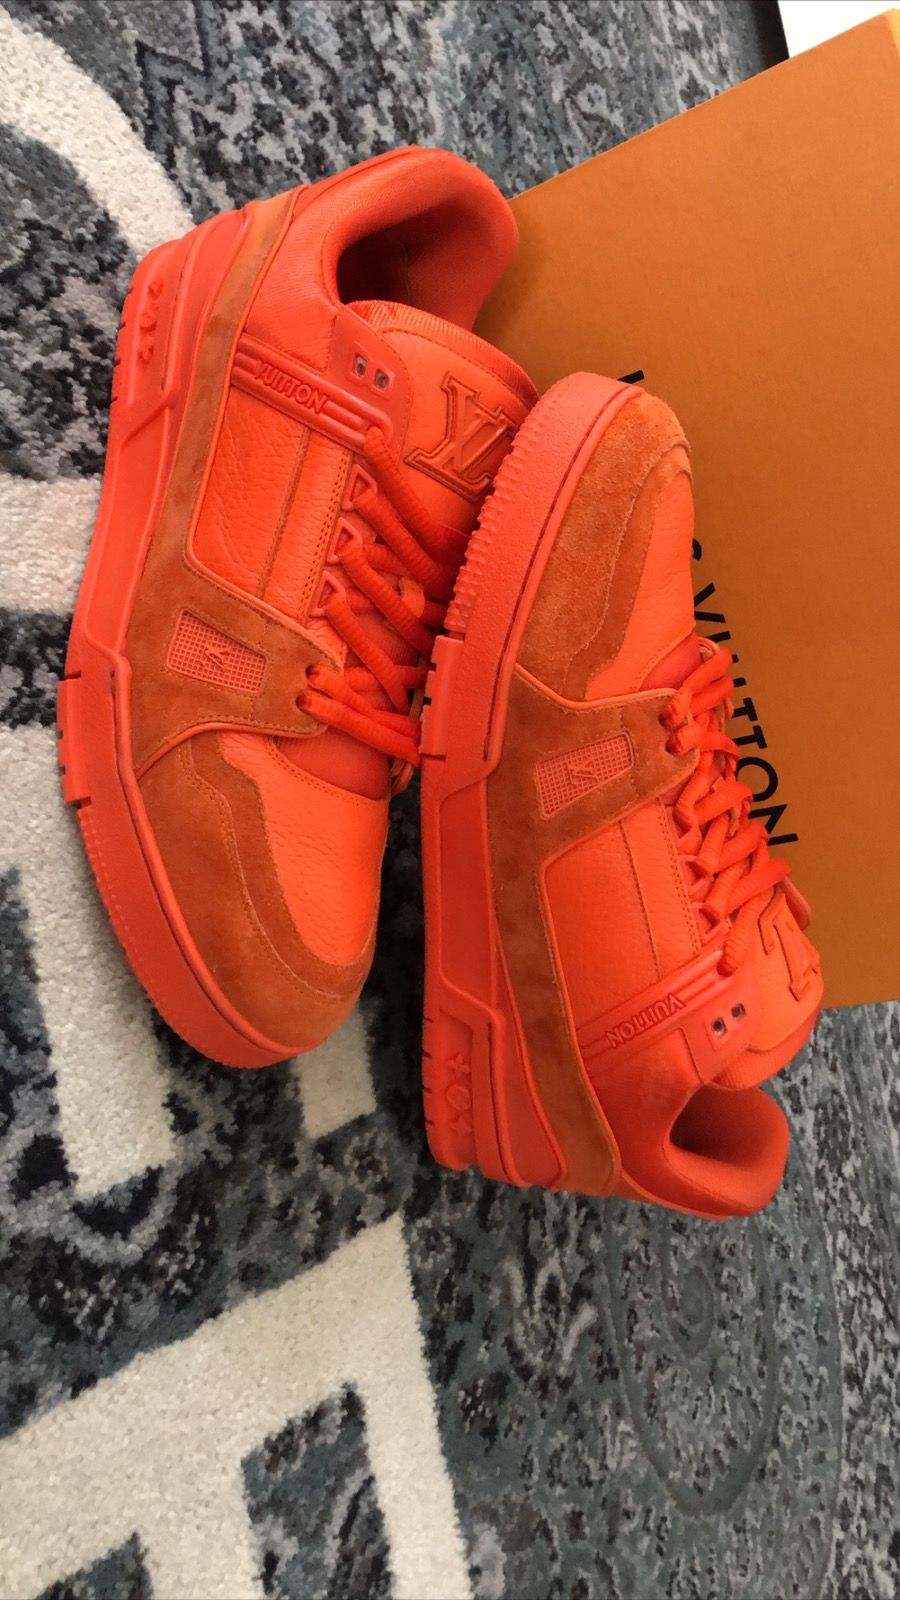 Louis Vuitton Figure of Speech MCA Low-Top Trainers w/ Tags - Orange  Sneakers, Shoes - LOU243209